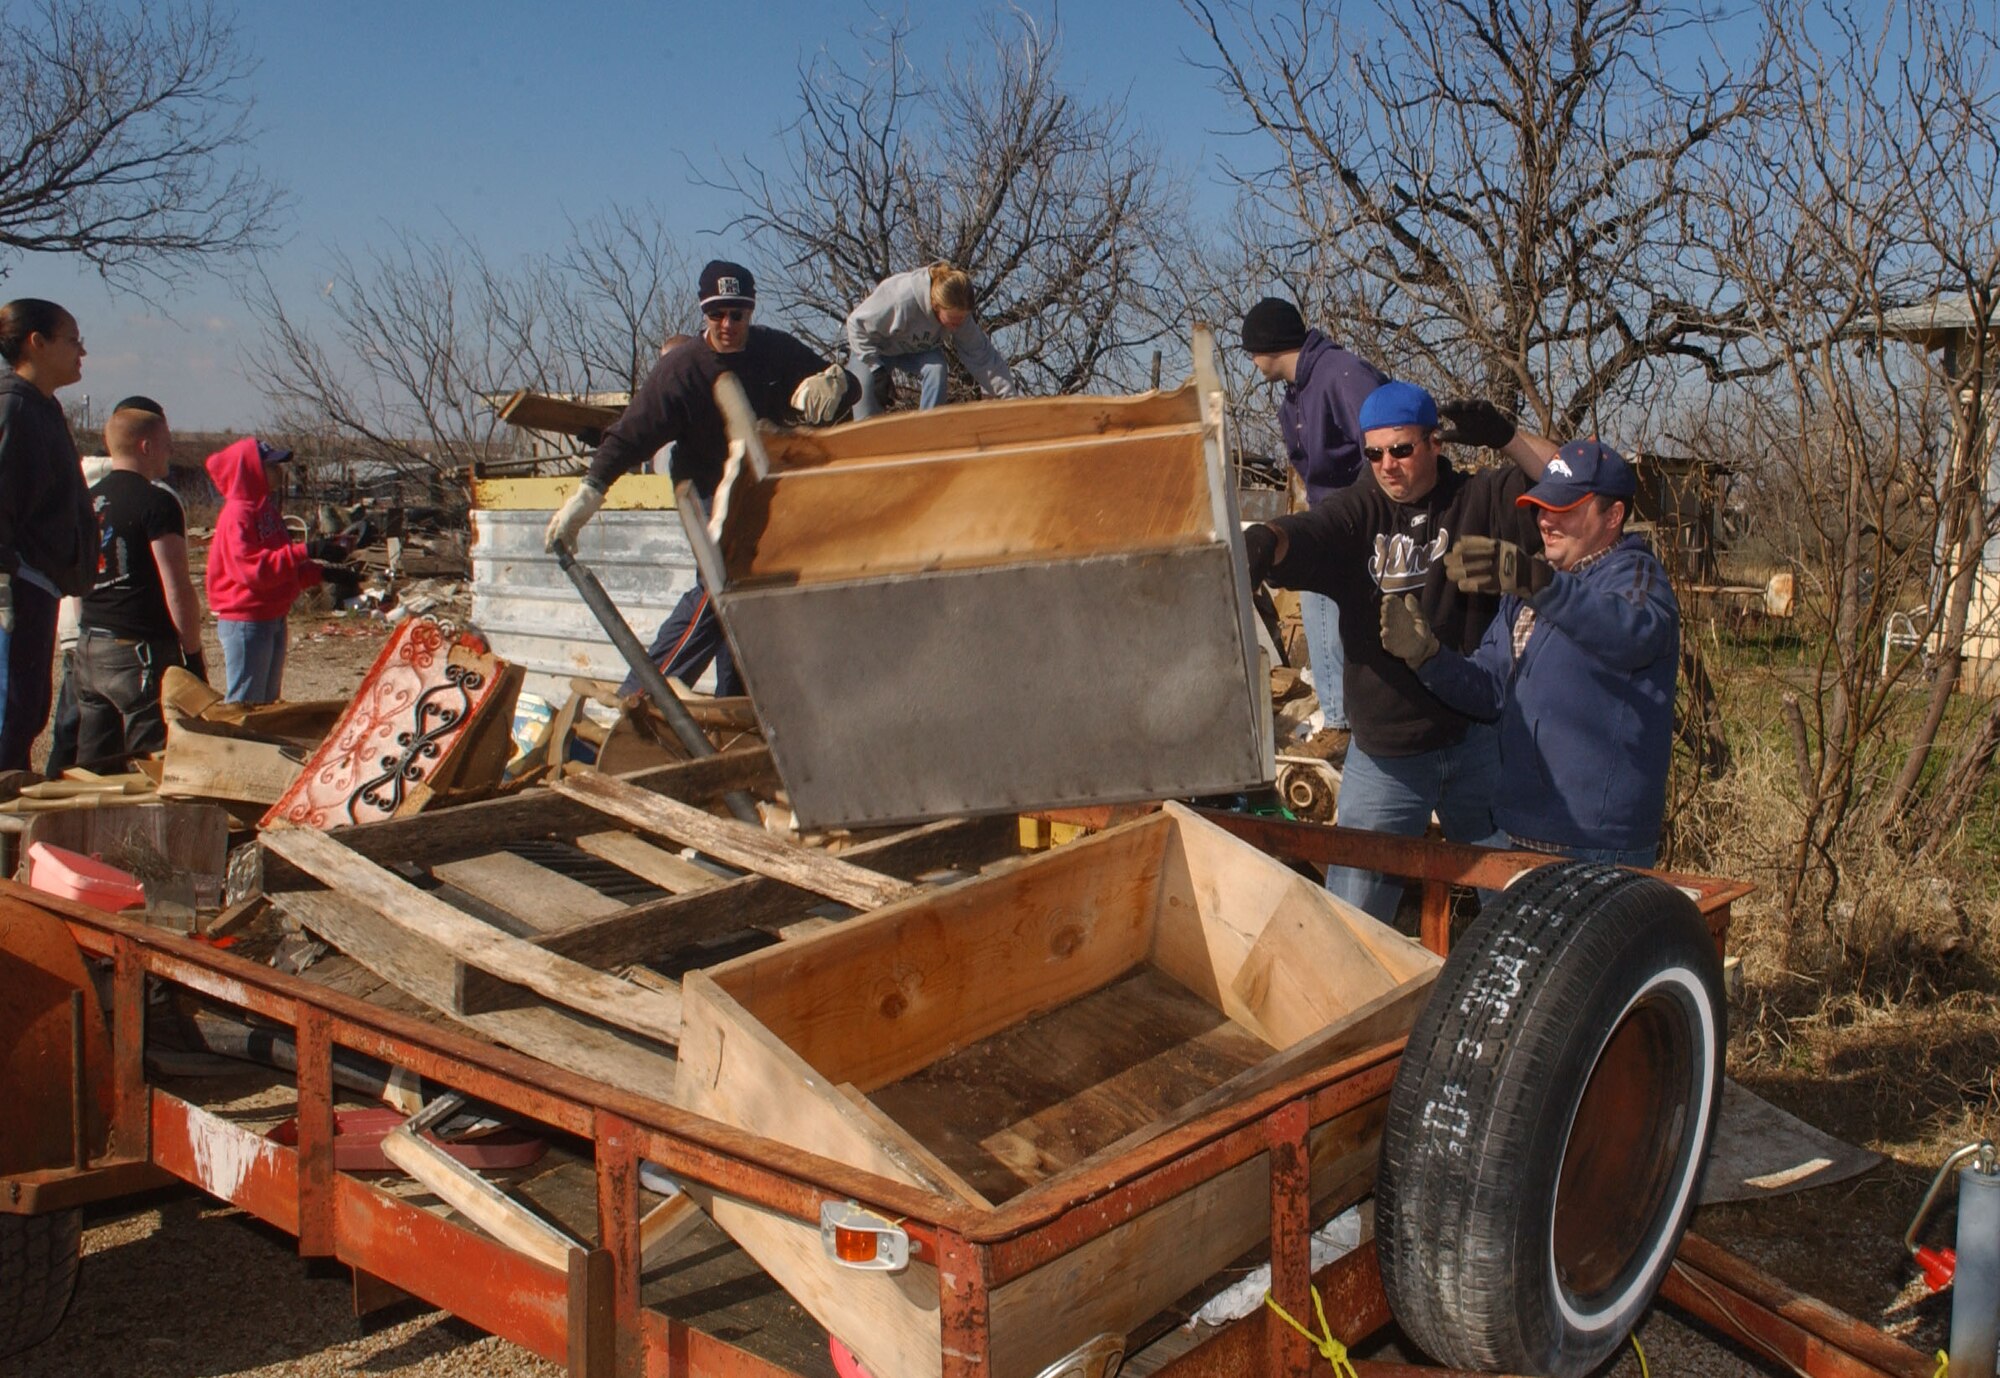 Volunteers toss rubbish onto another trailer during the clean-up. Some of the rubbish included large pieces of furniture and rusty appliances. (U.S. Air Force photo by Staff Sgt. Gina O’Bryan)